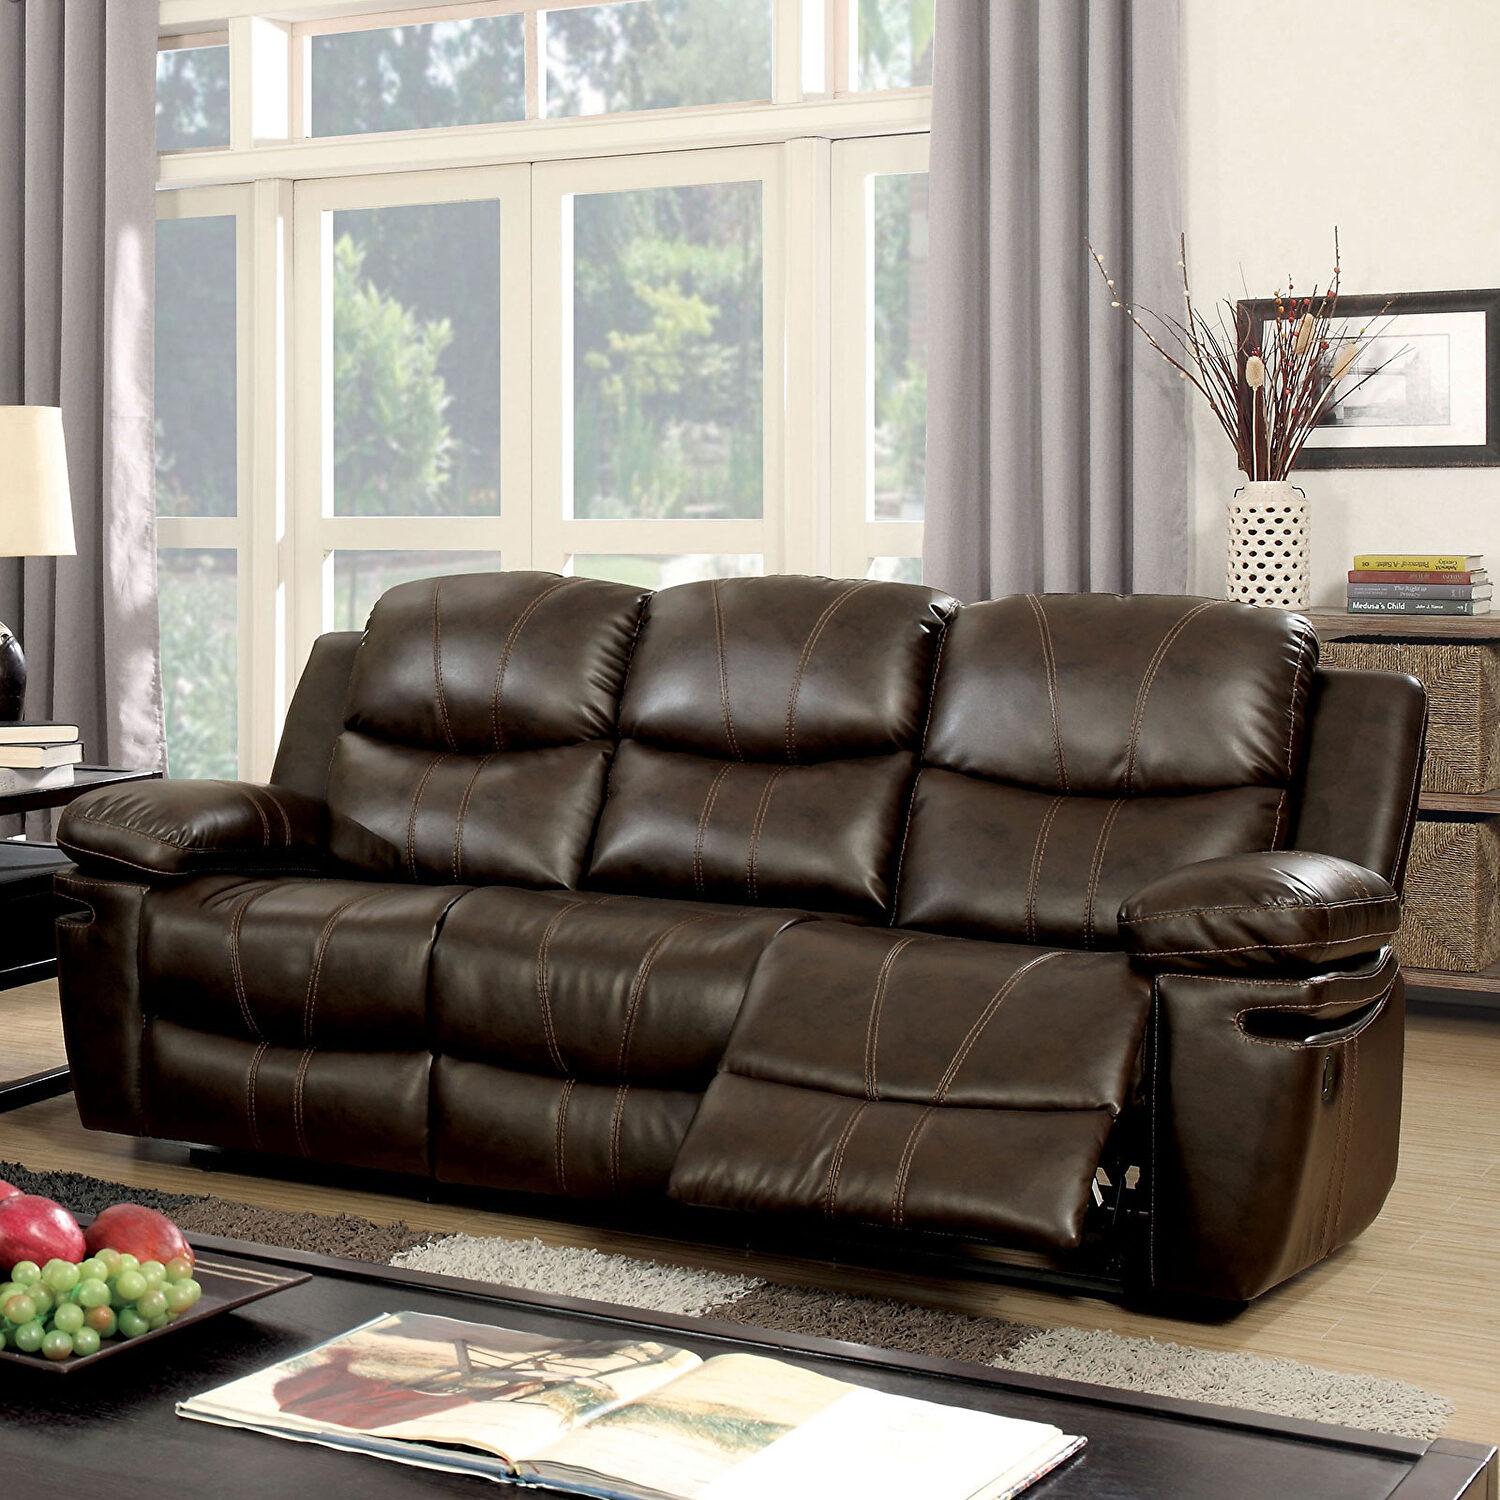 

    
CM6992-3PC Listowel Recliner Sofa Loveseat and Chair
